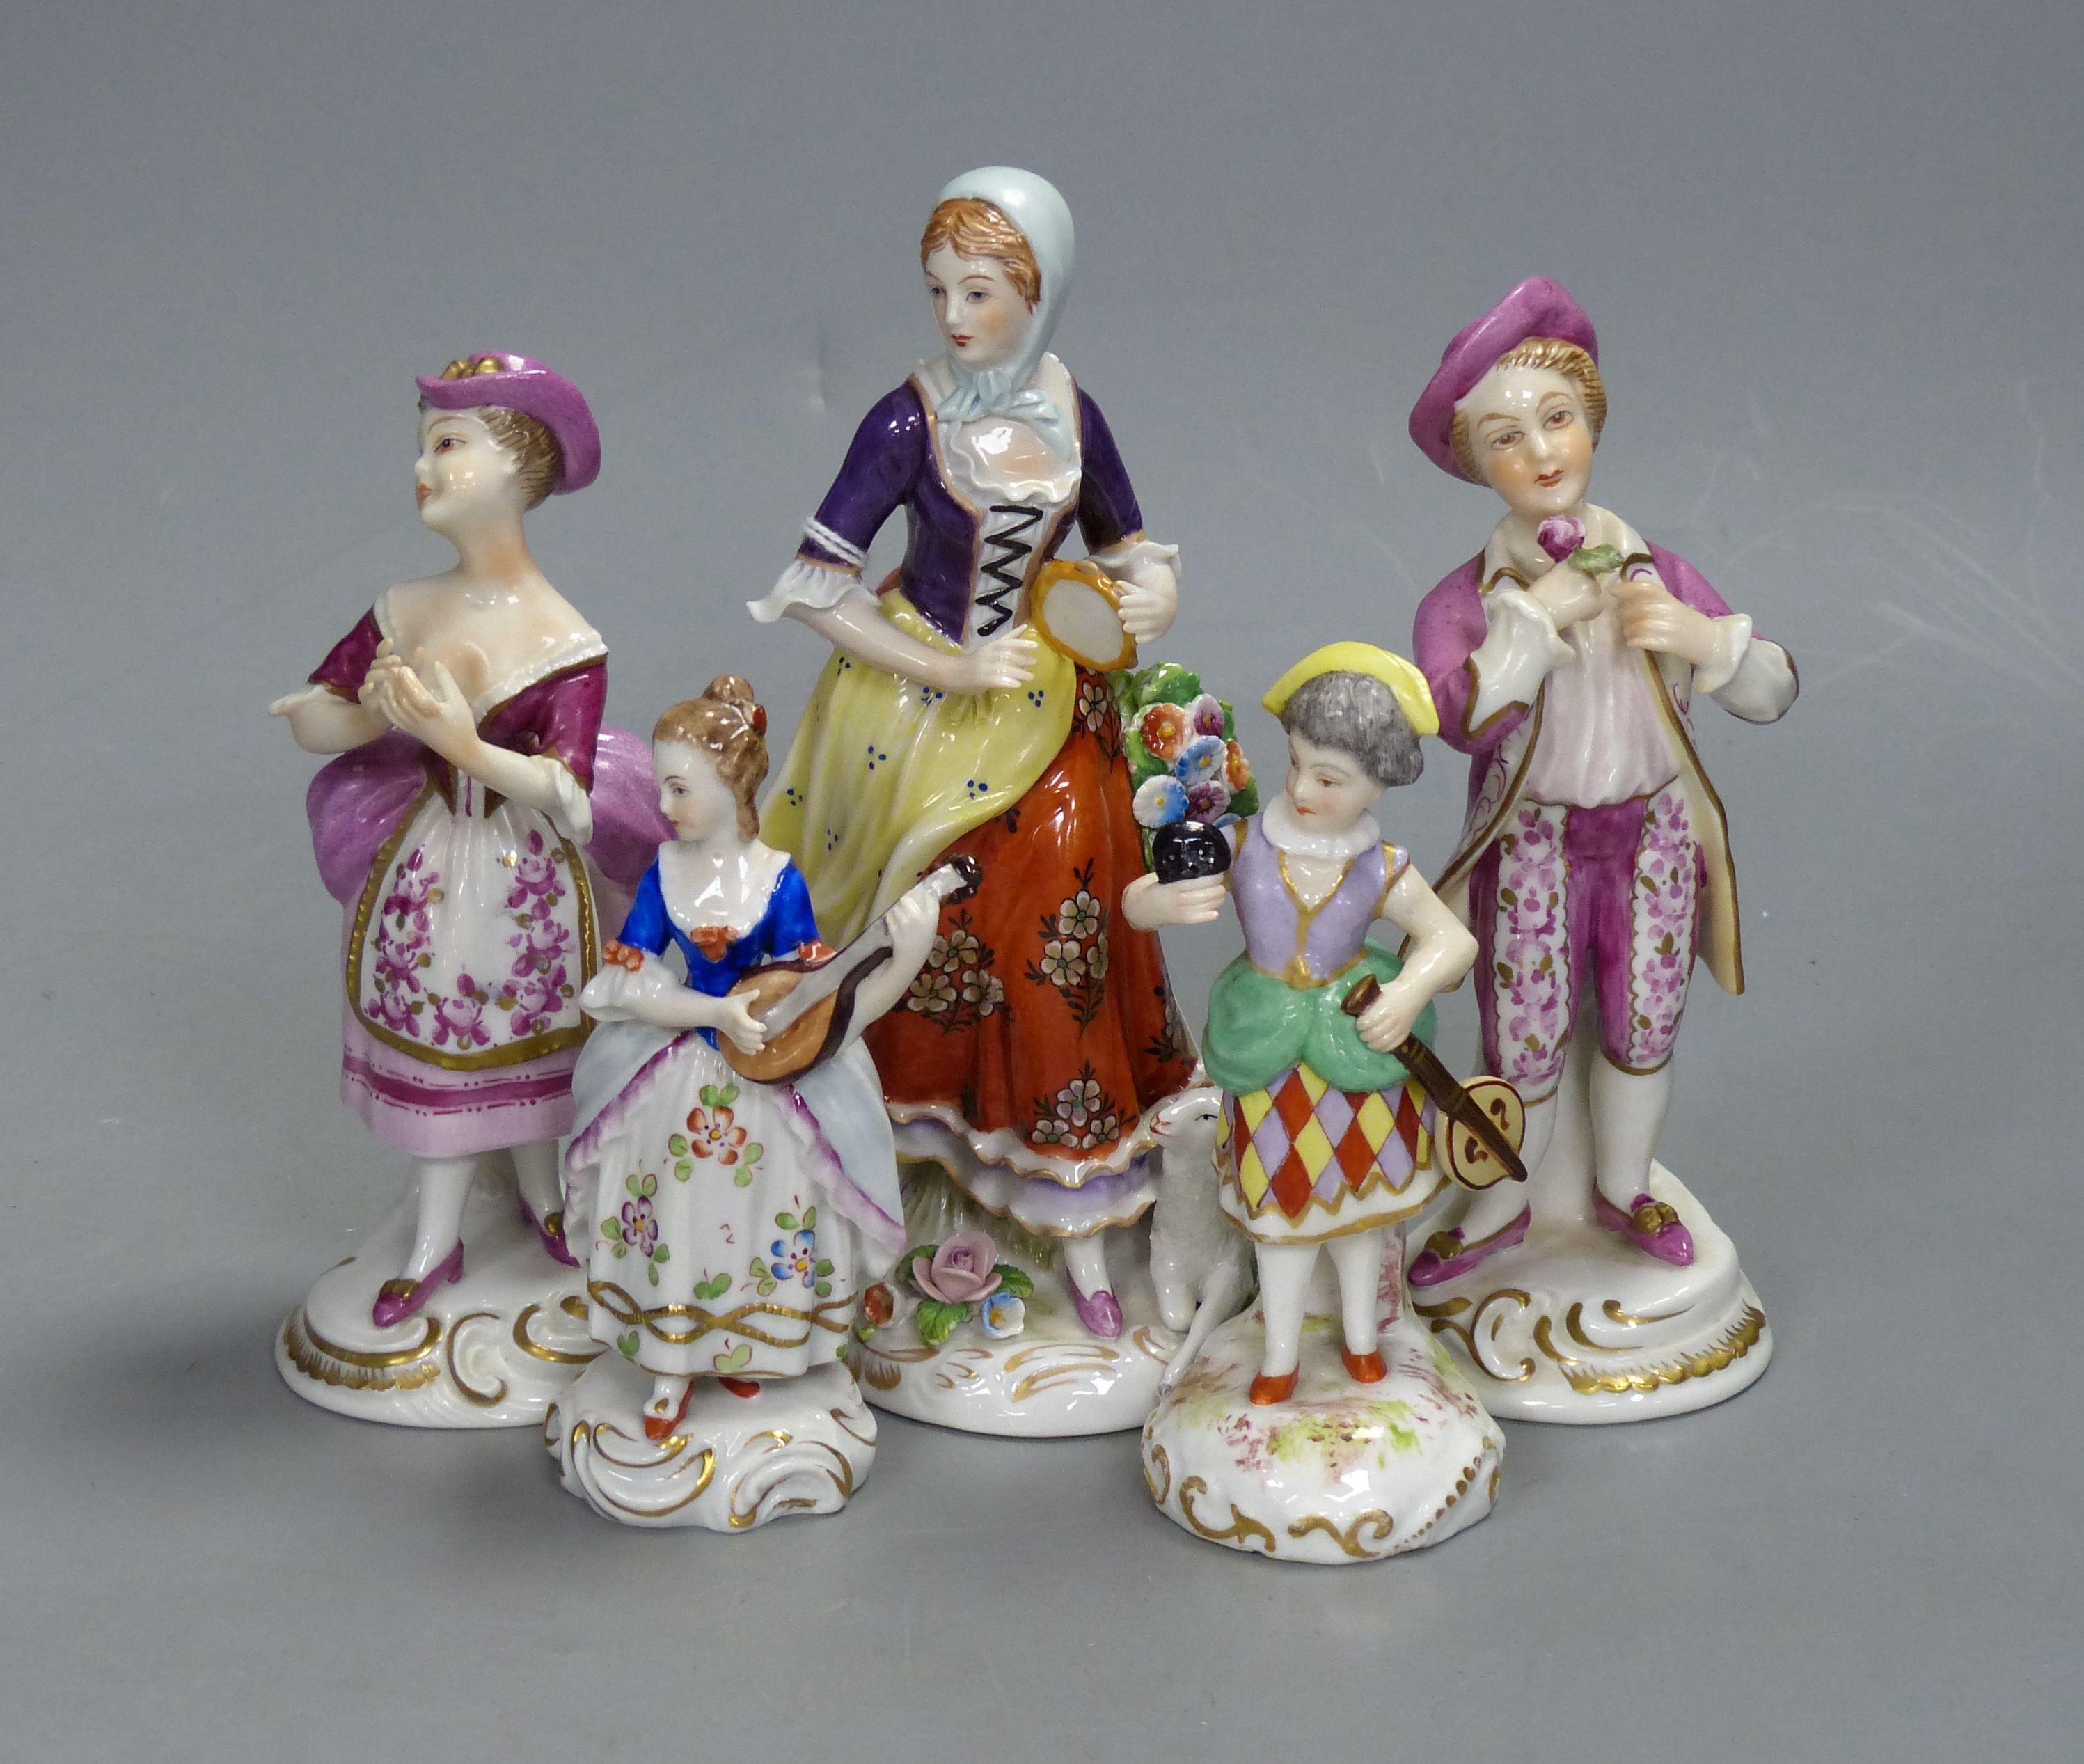 A German porcelain figure of a masked harlequin with stringed instrument and four other Continental porcelain figures, tallest 16cm